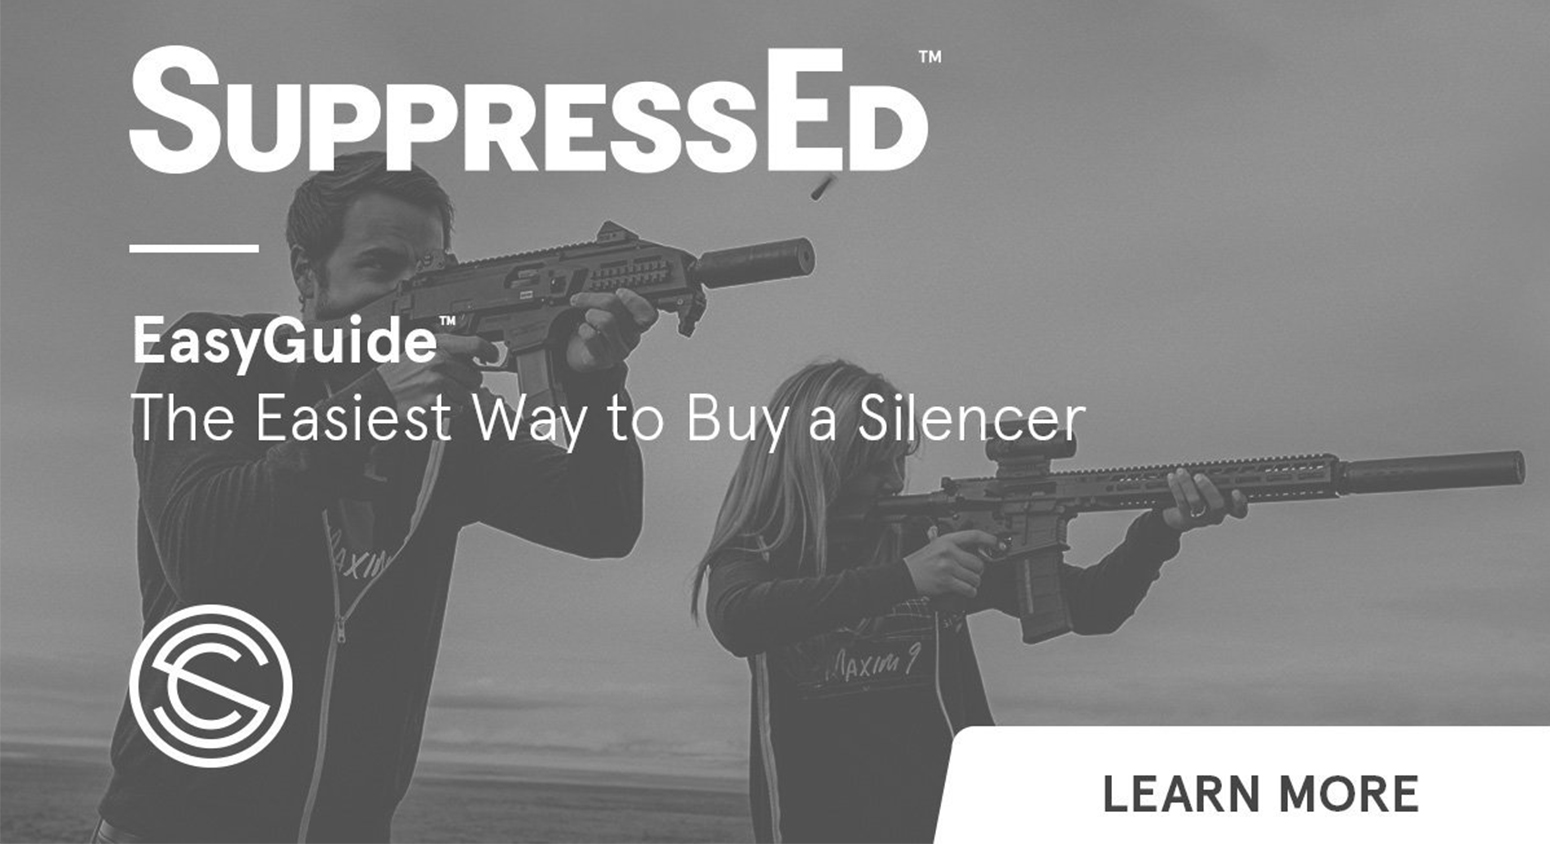 SilencerCo SuppressEd EasyGuide